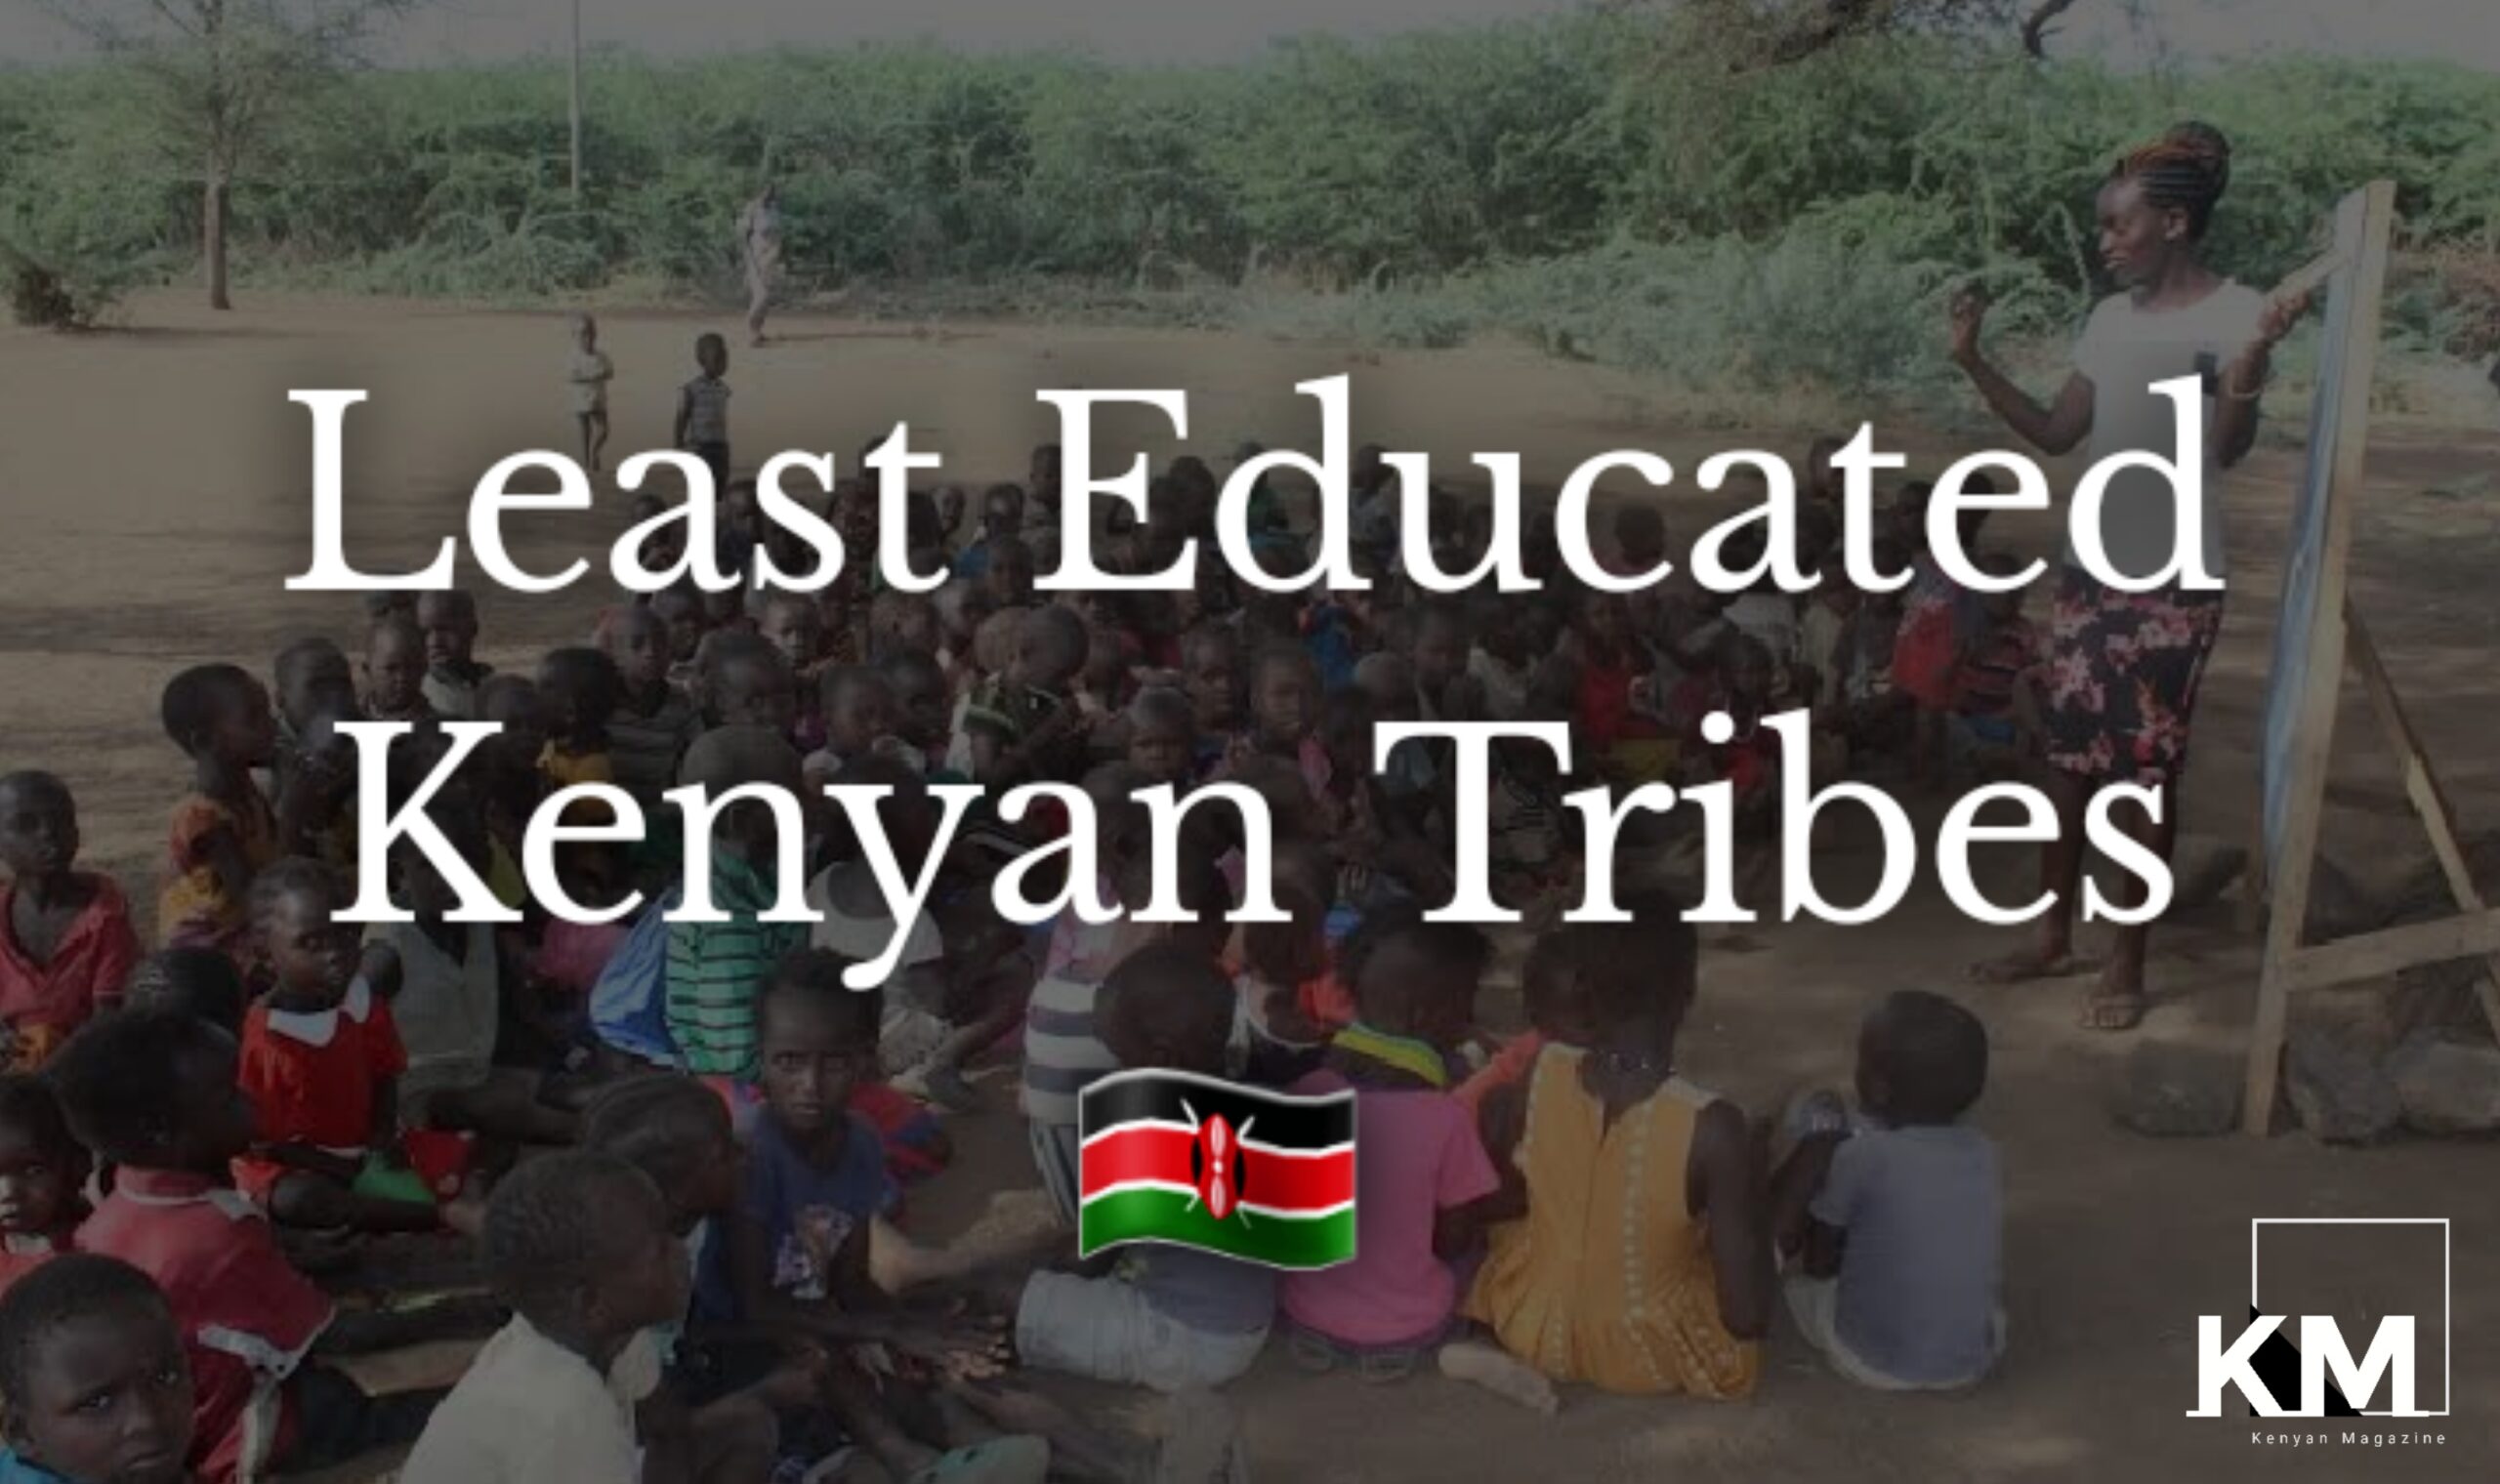 Least Educated Kenyan Tribes